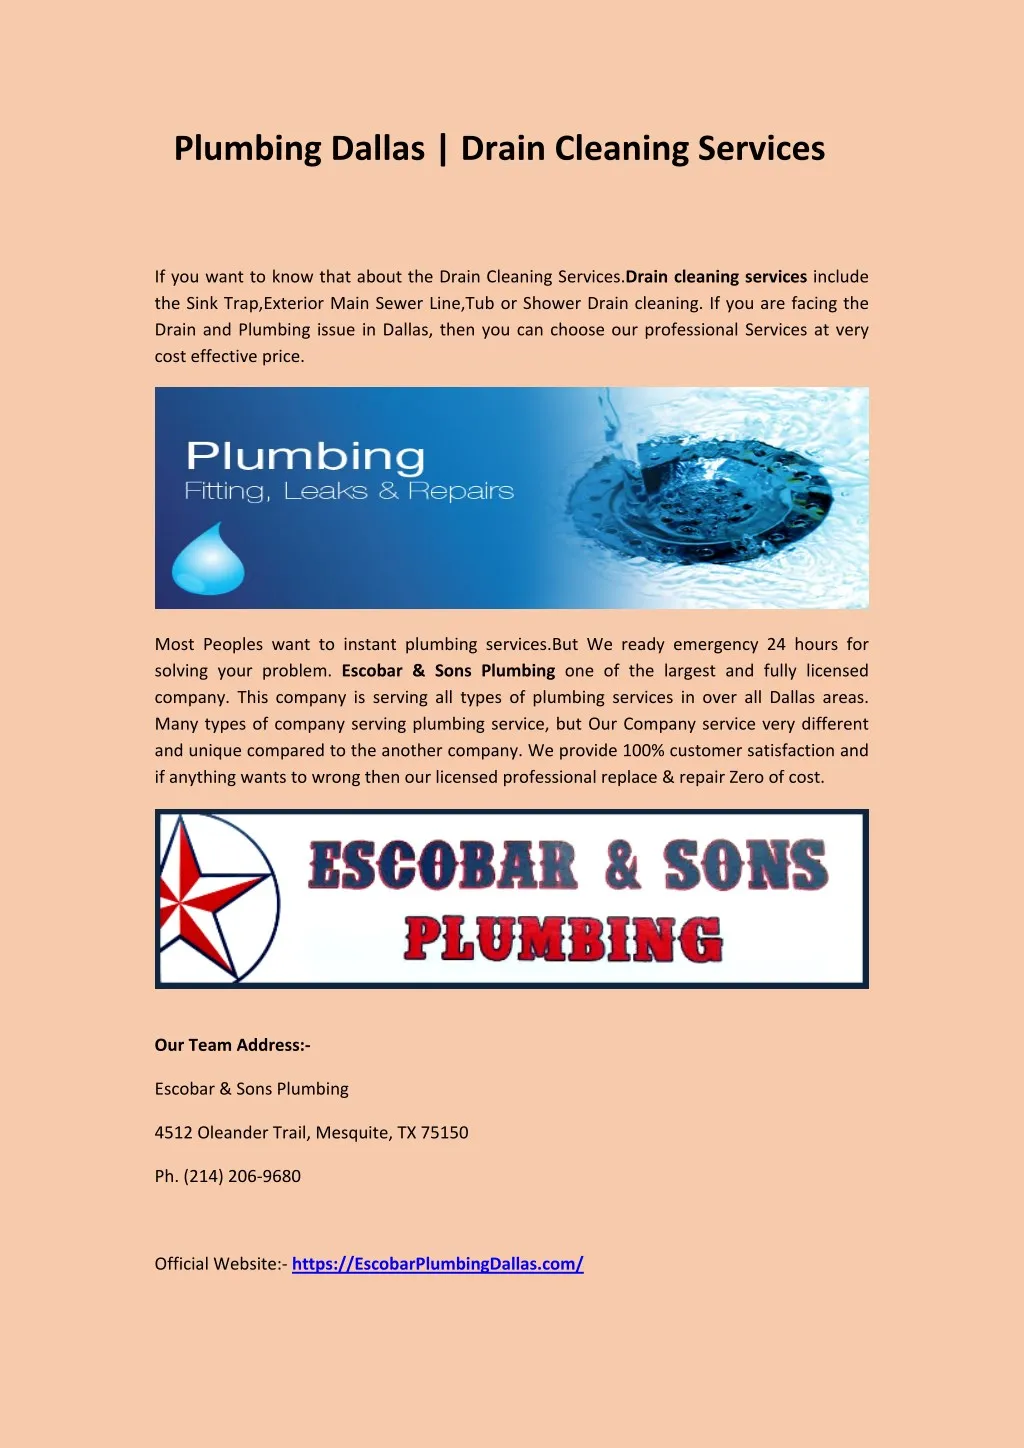 plumbing dallas drain cleaning services